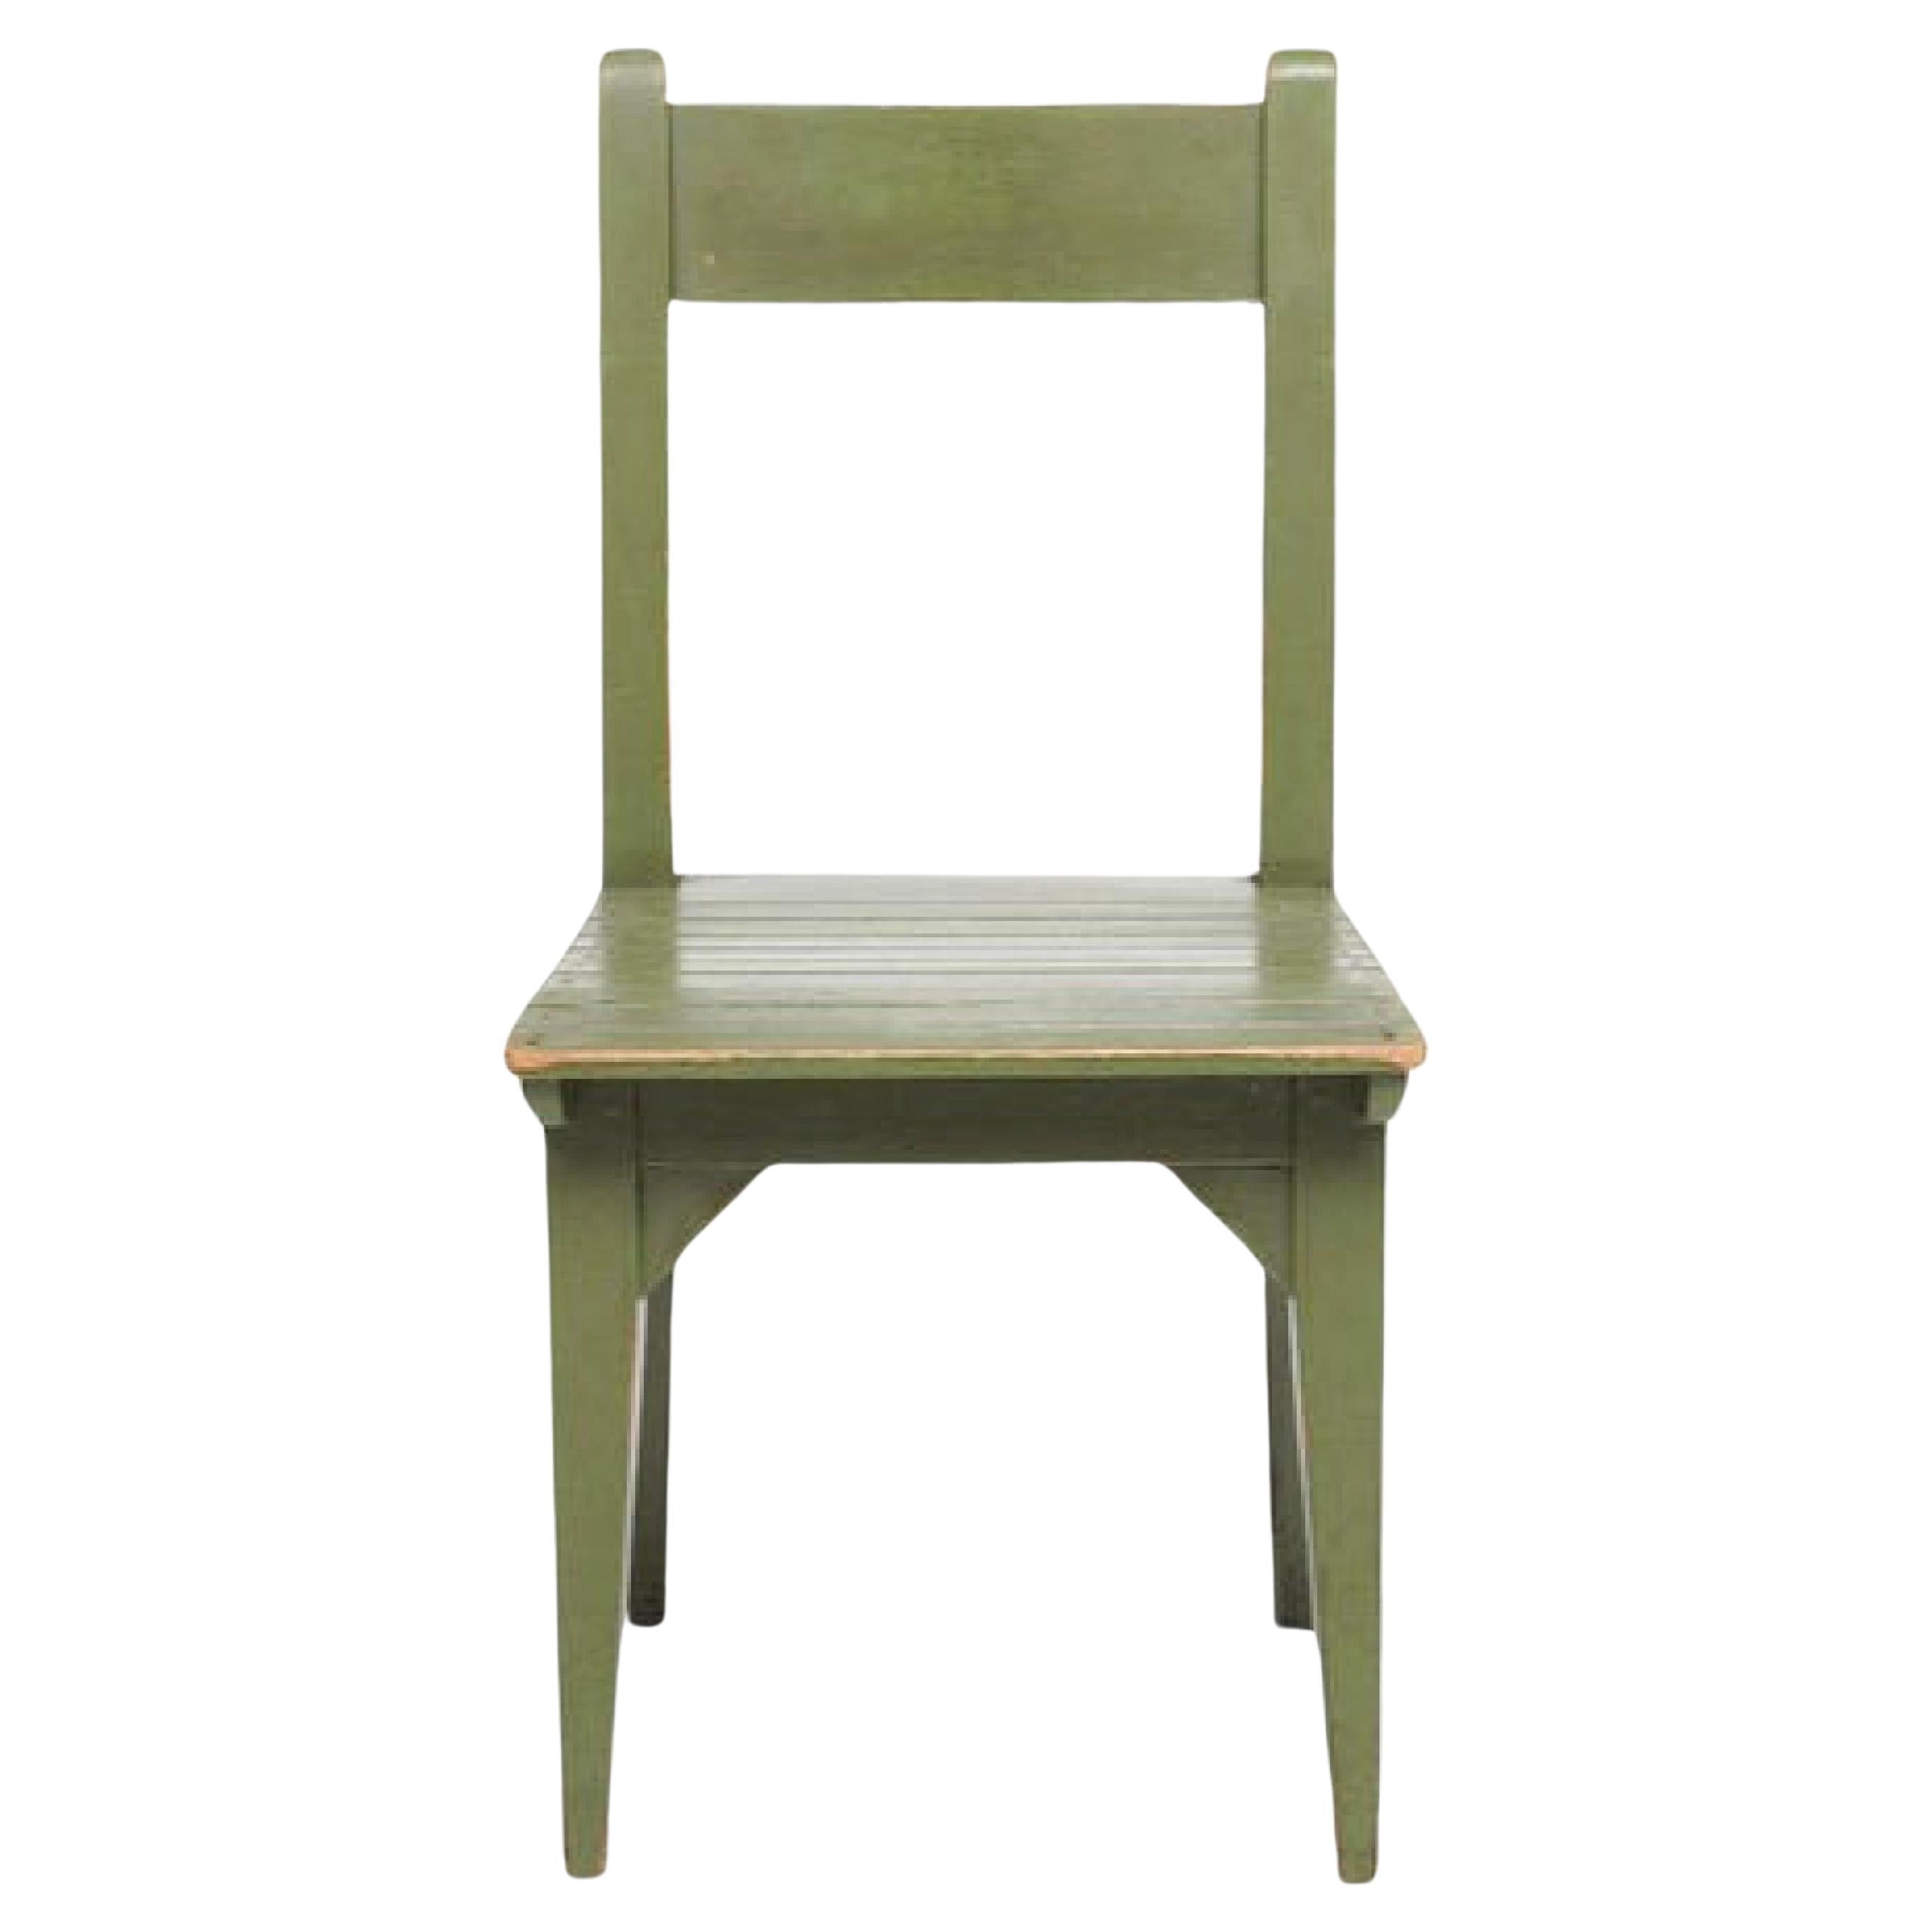 Roy McMakin Painted Wood Postmodern Dining Chair, Green, 1982, USA.